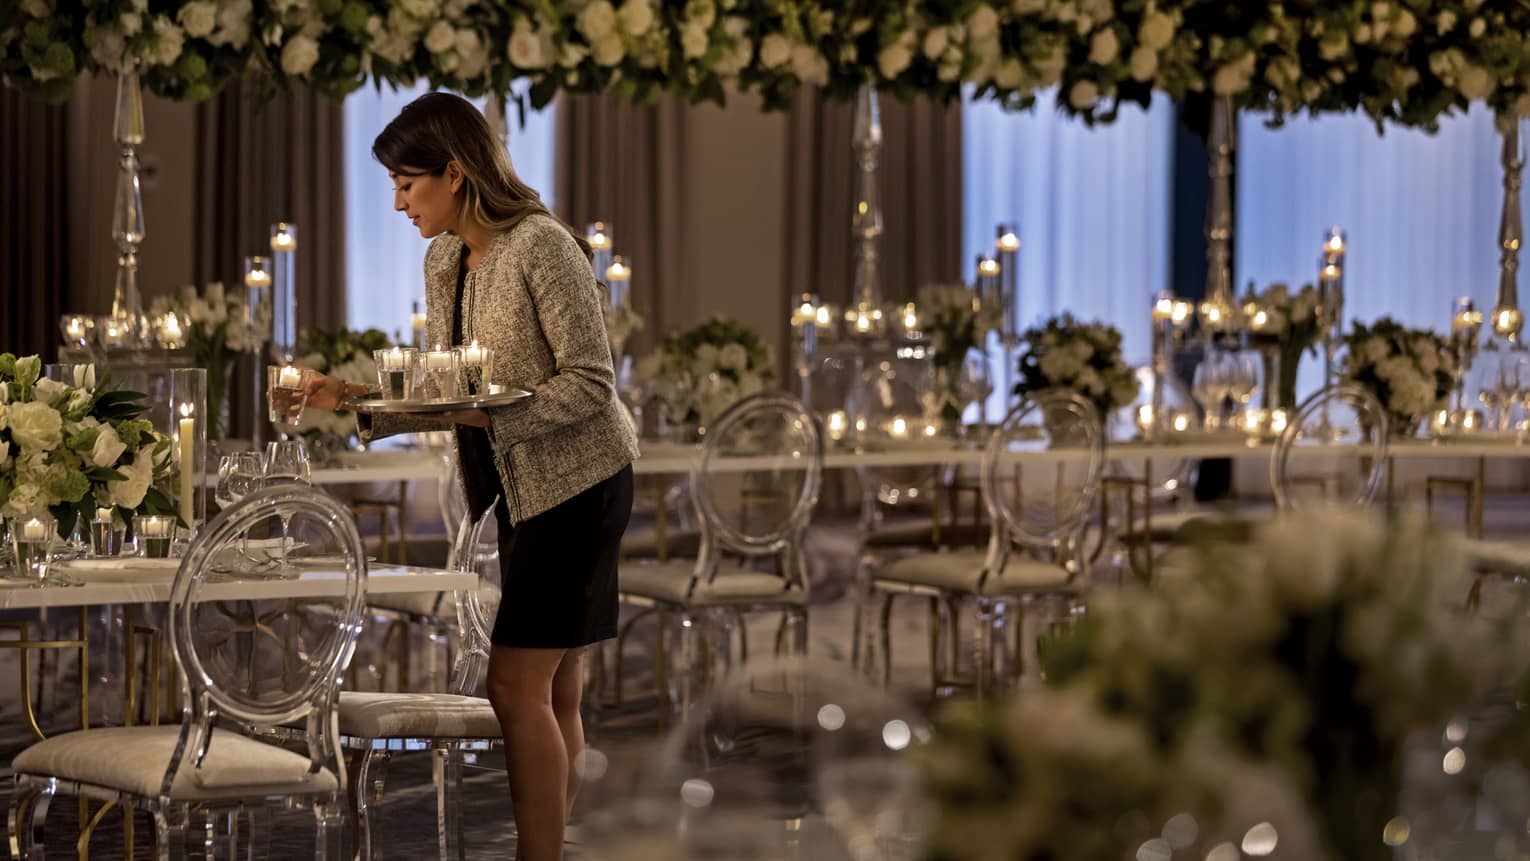 A member of the hotel setting up for a wedding by placing candles on long elegant tables that have flowers as center pieces.